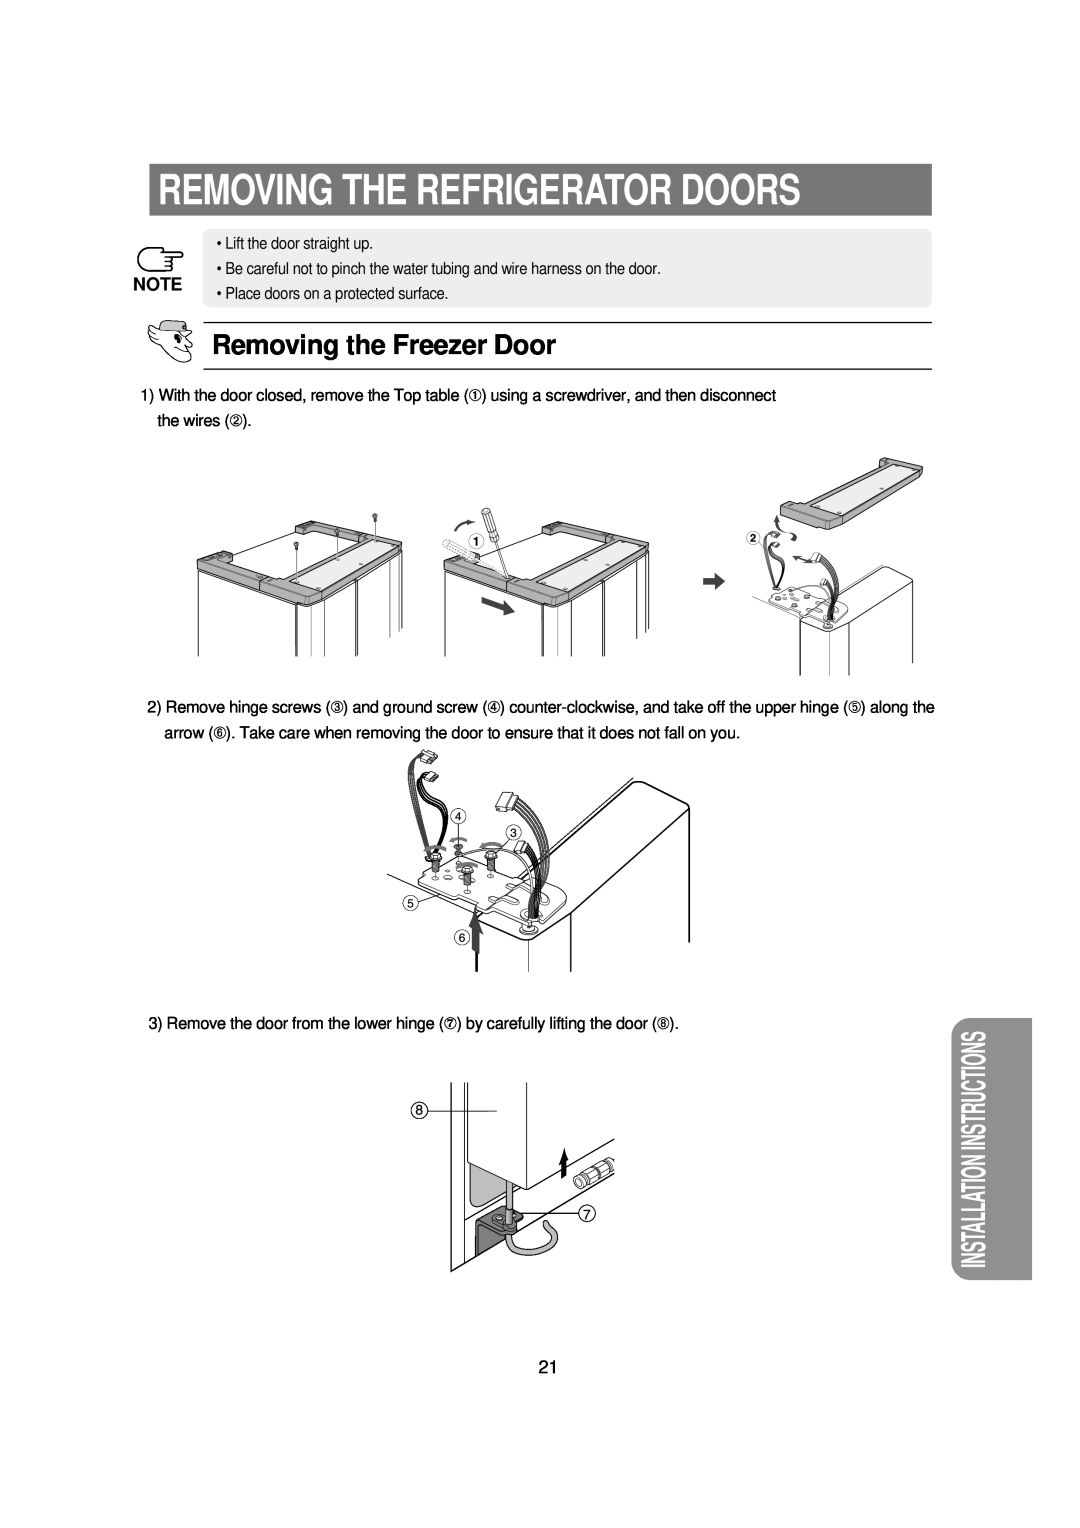 Samsung RSE8J, RSE8K, RSE8T, RSE8V Removing The Refrigerator Doors, Removing the Freezer Door, Installation Instructions 